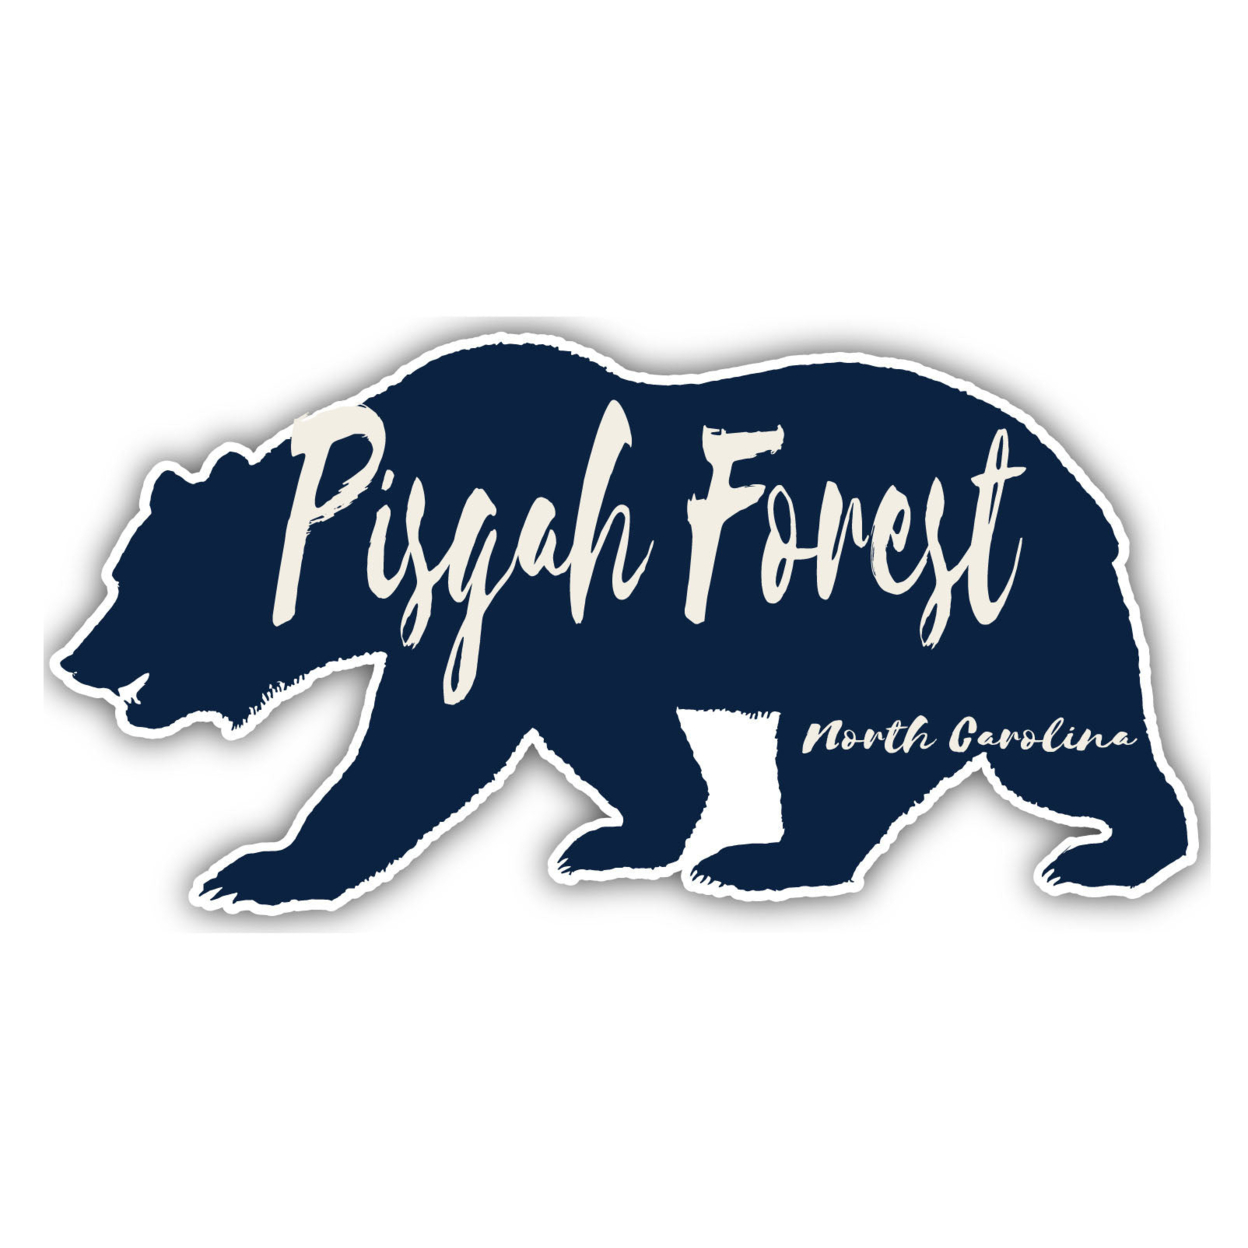 Pisgah Forest North Carolina Souvenir Decorative Stickers (Choose Theme And Size) - Single Unit, 4-Inch, Great Outdoors